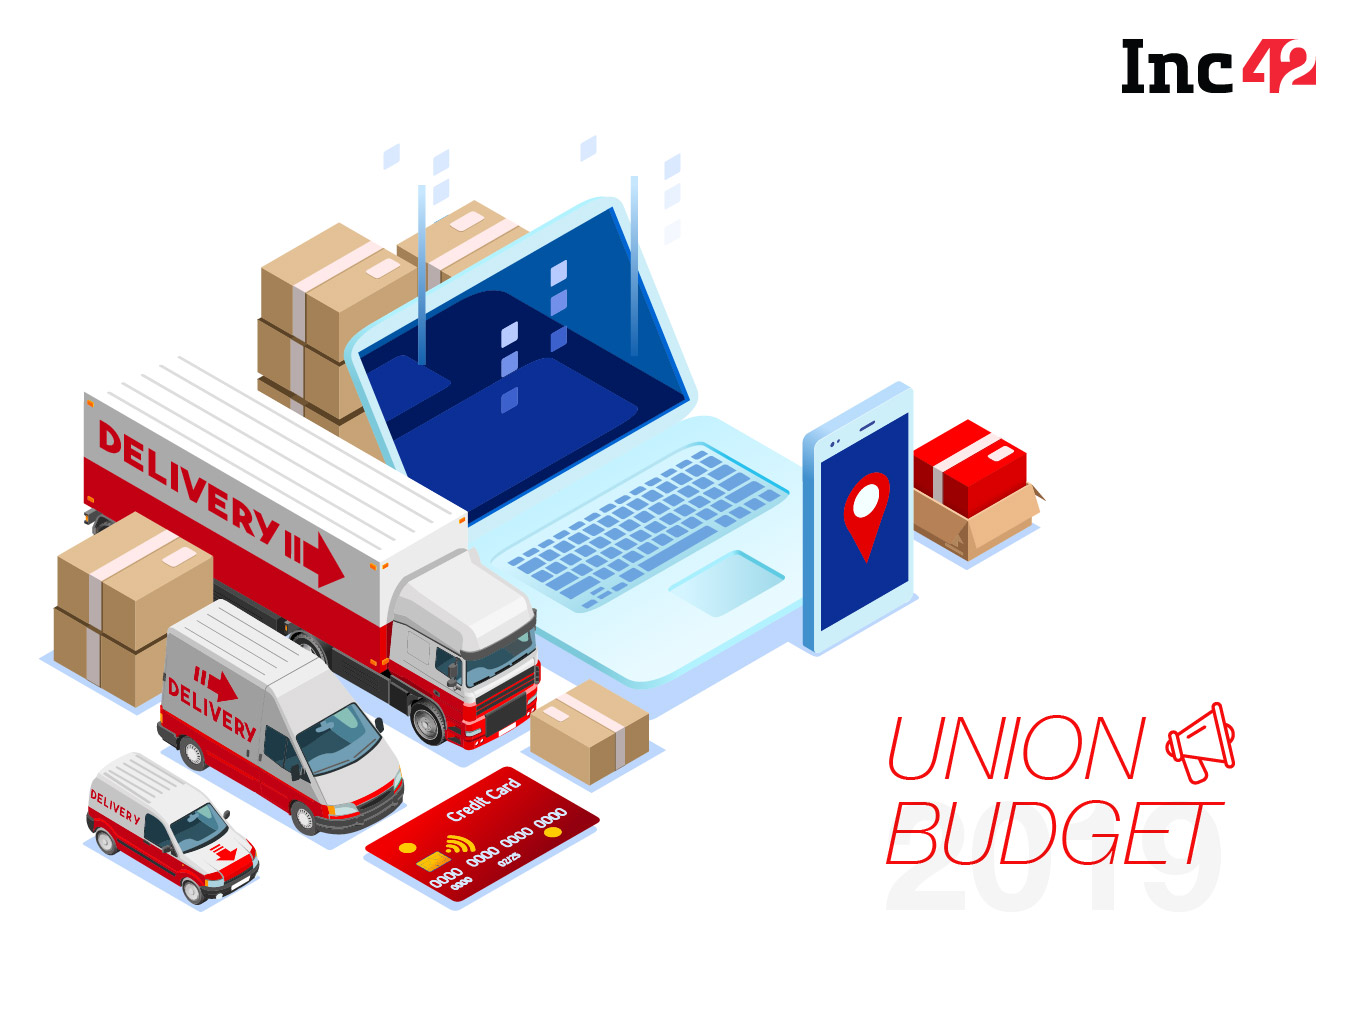 Union Budget 2019: Government To Invest INR 100 Lakh Cr In Infrastructure